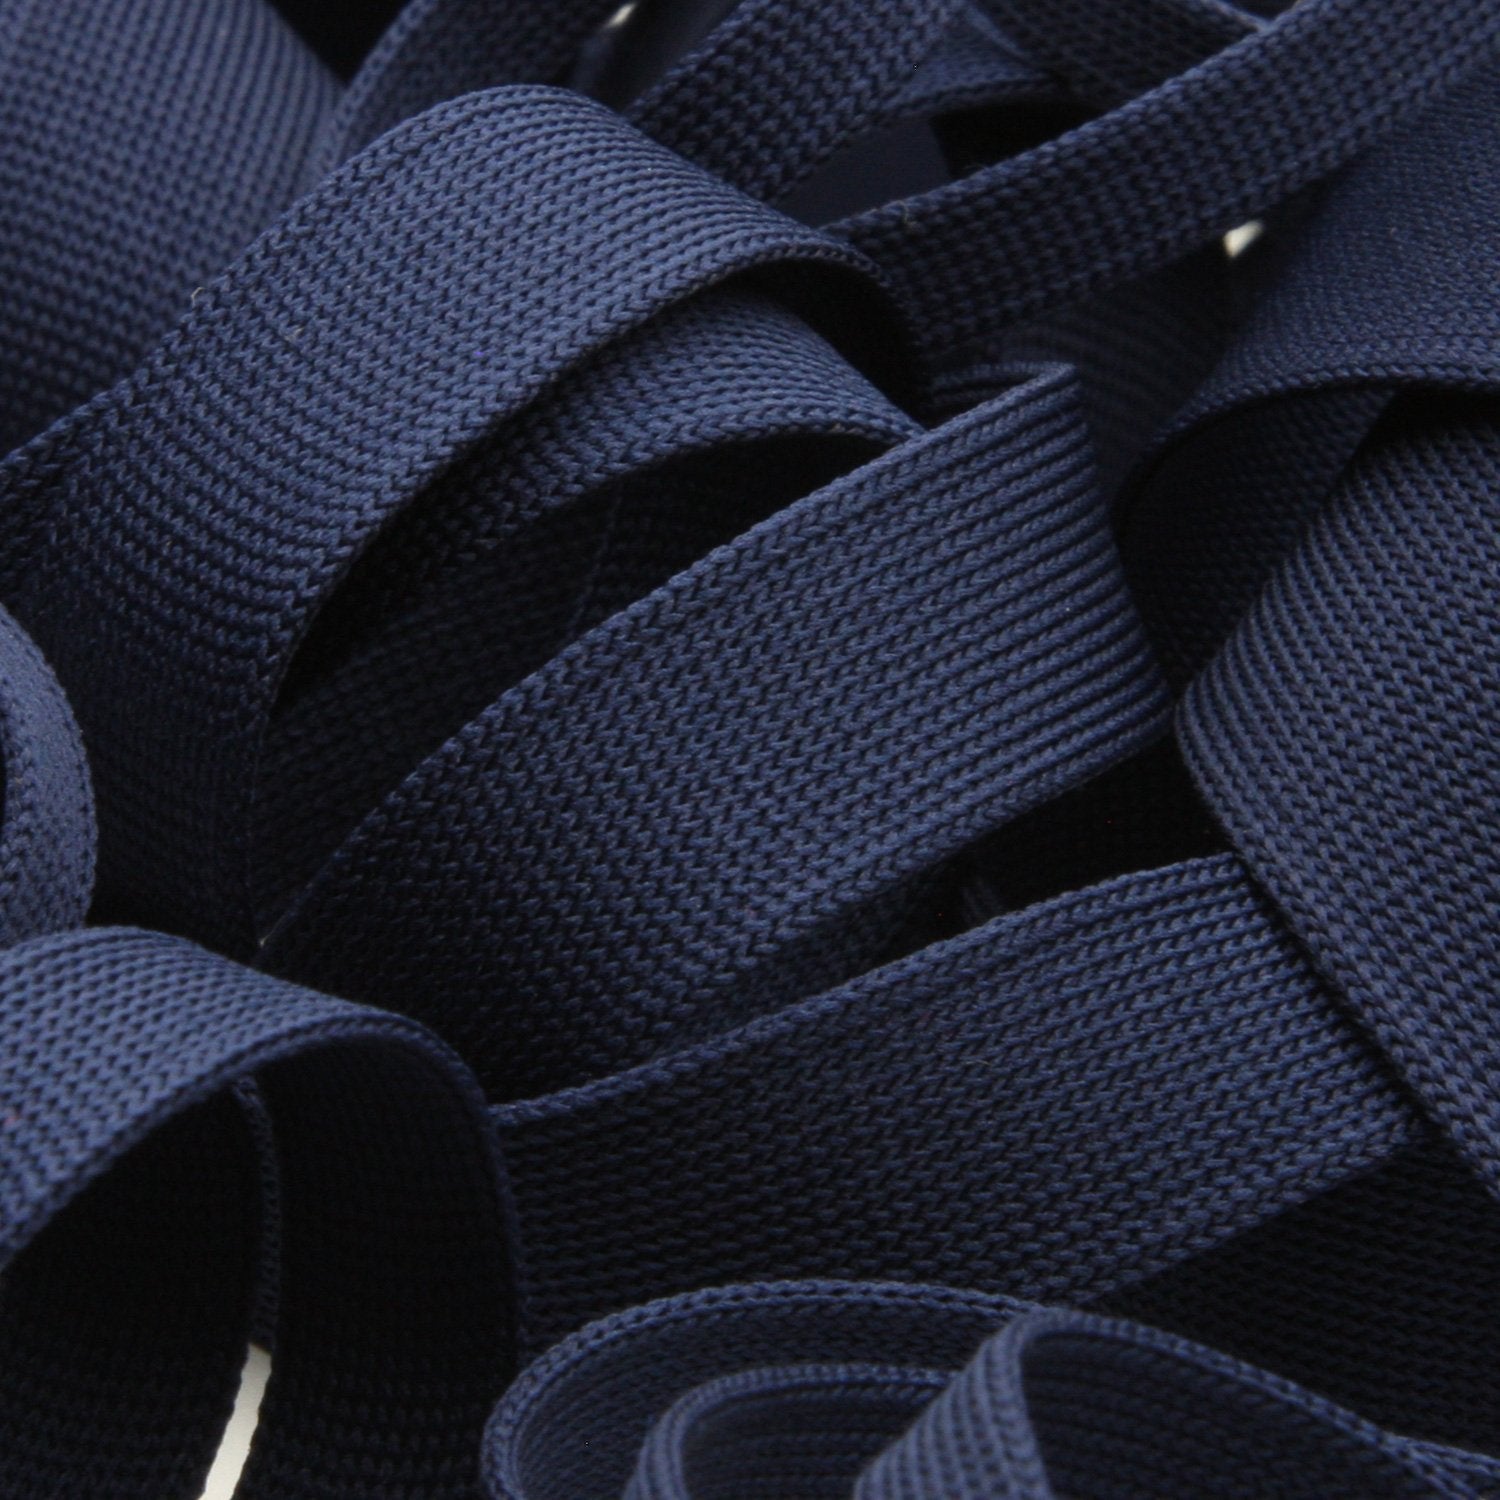 Navy Blue on White Fabric Iron-on Tape 12mm (0.47) 3m (9.8 ft)